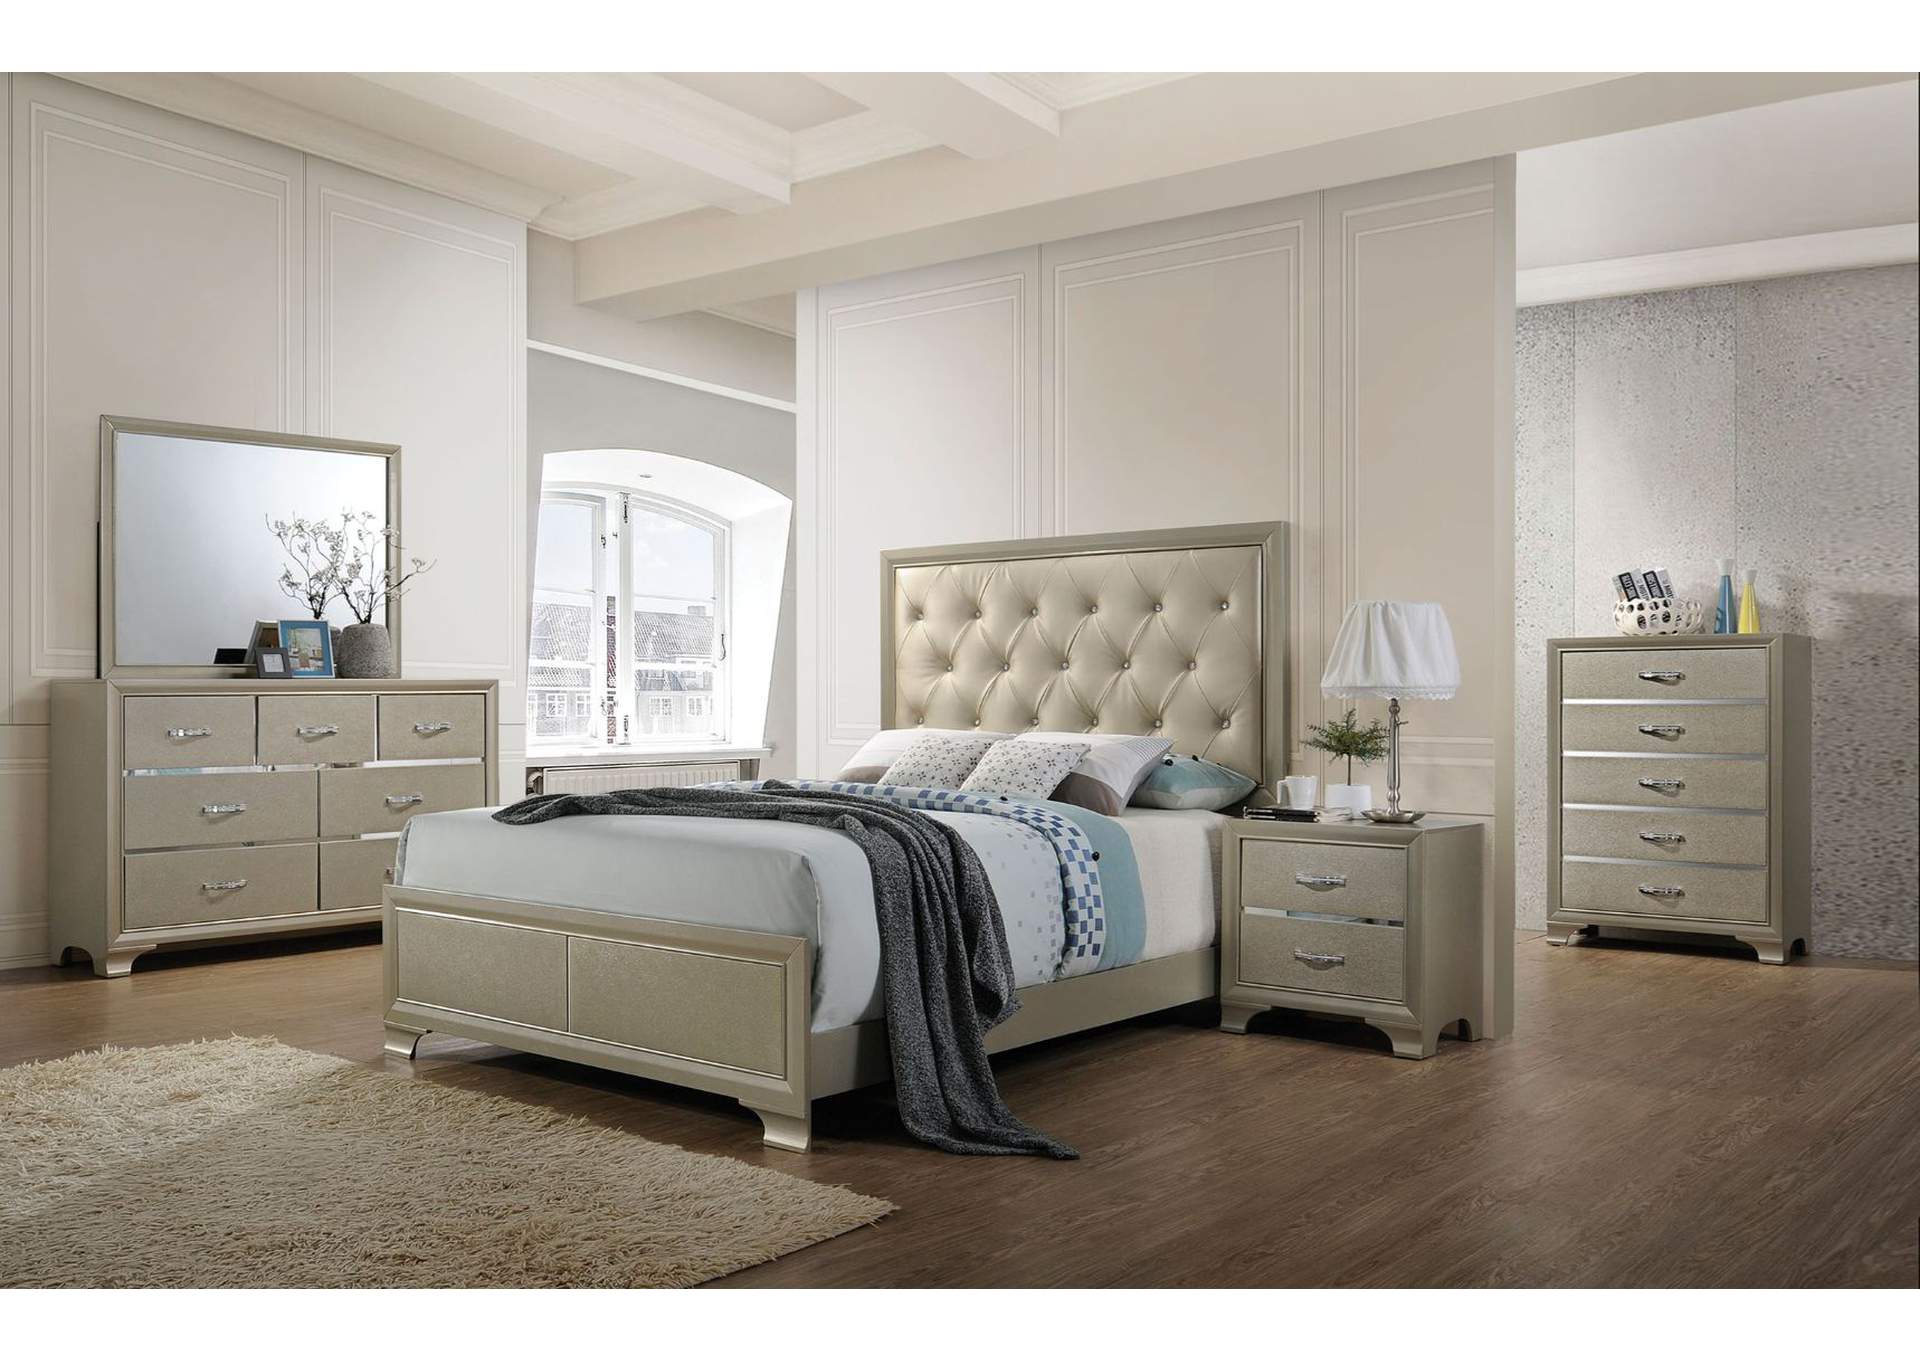 Carine Queen Bed,Acme